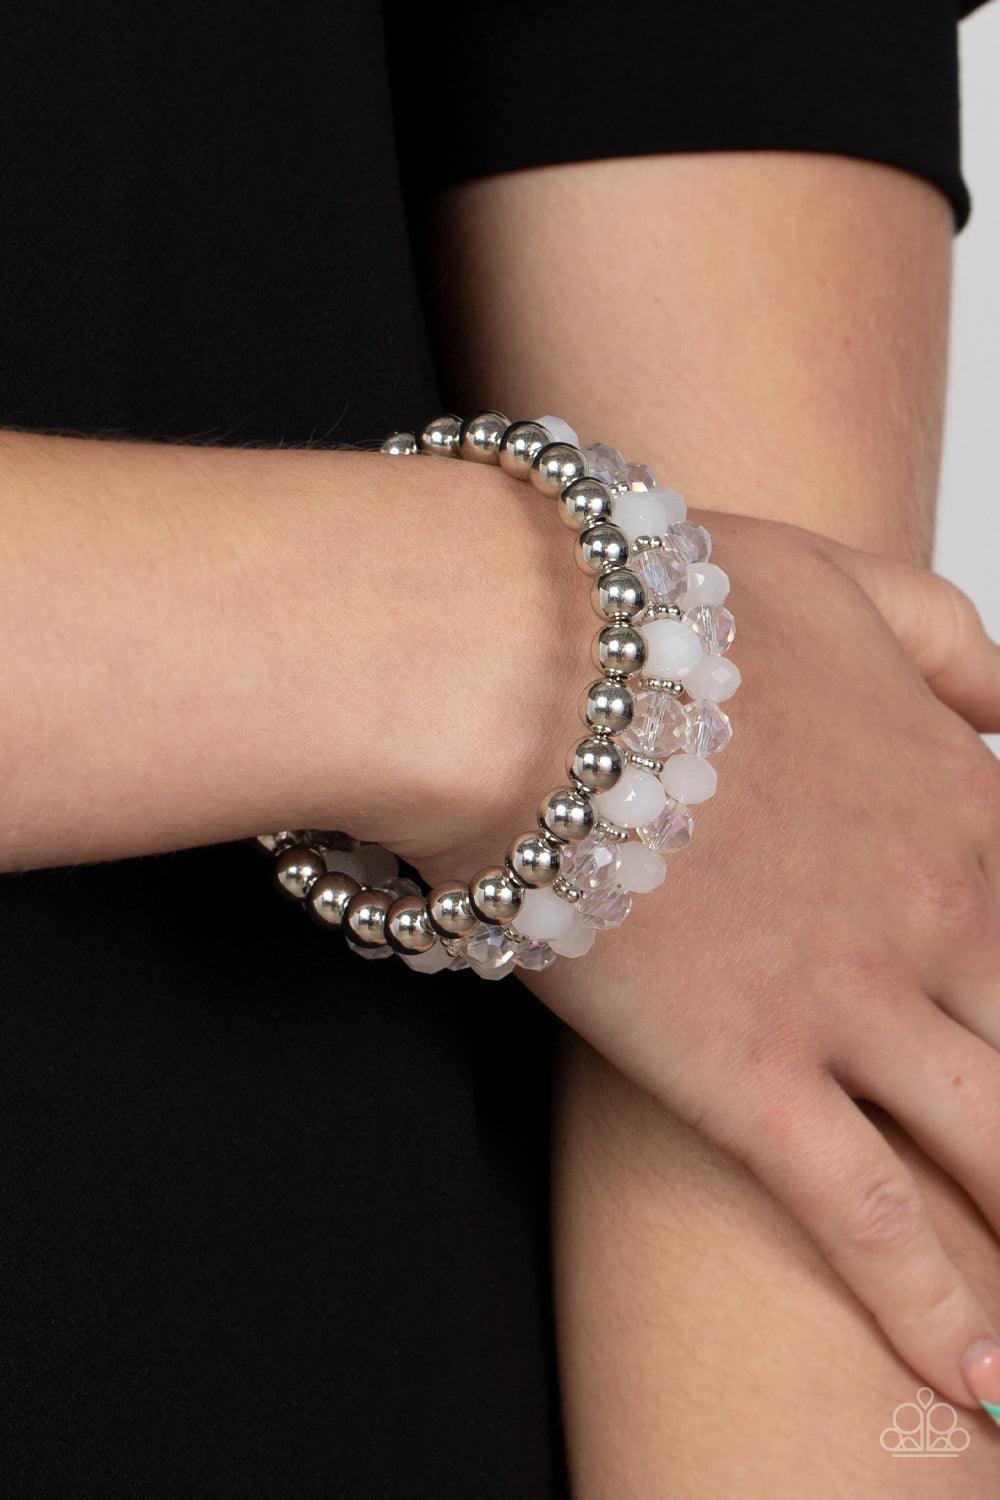 Gimme Gimme White Coil Bracelet - Jewelry by Bretta